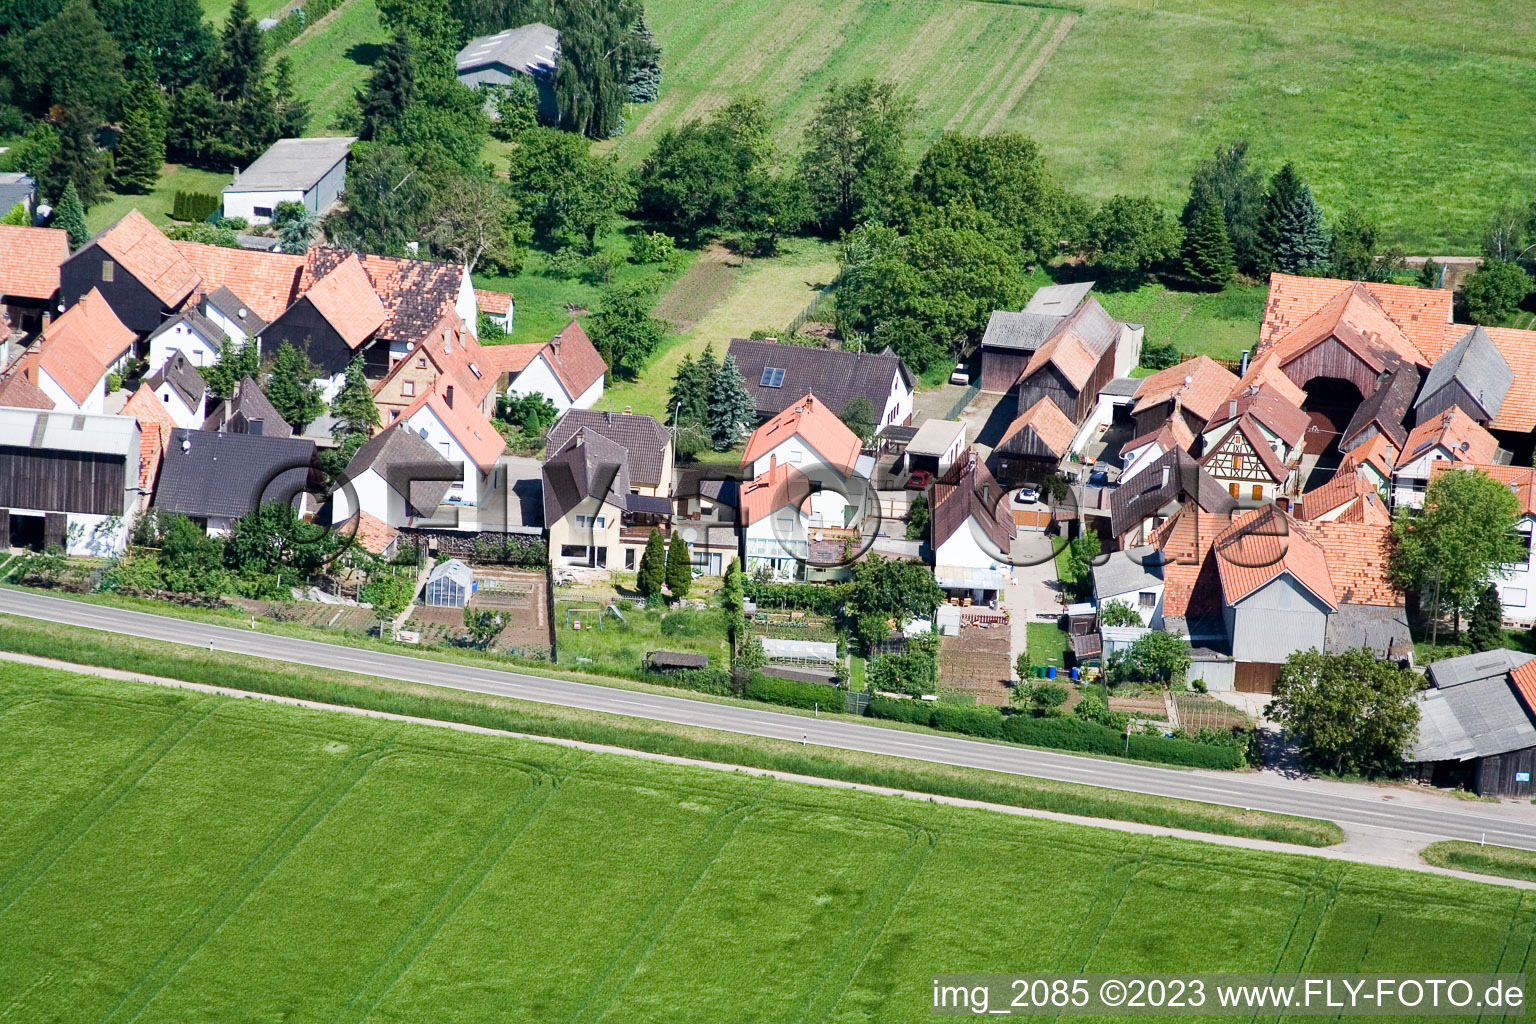 District Minderslachen in Kandel in the state Rhineland-Palatinate, Germany from the plane